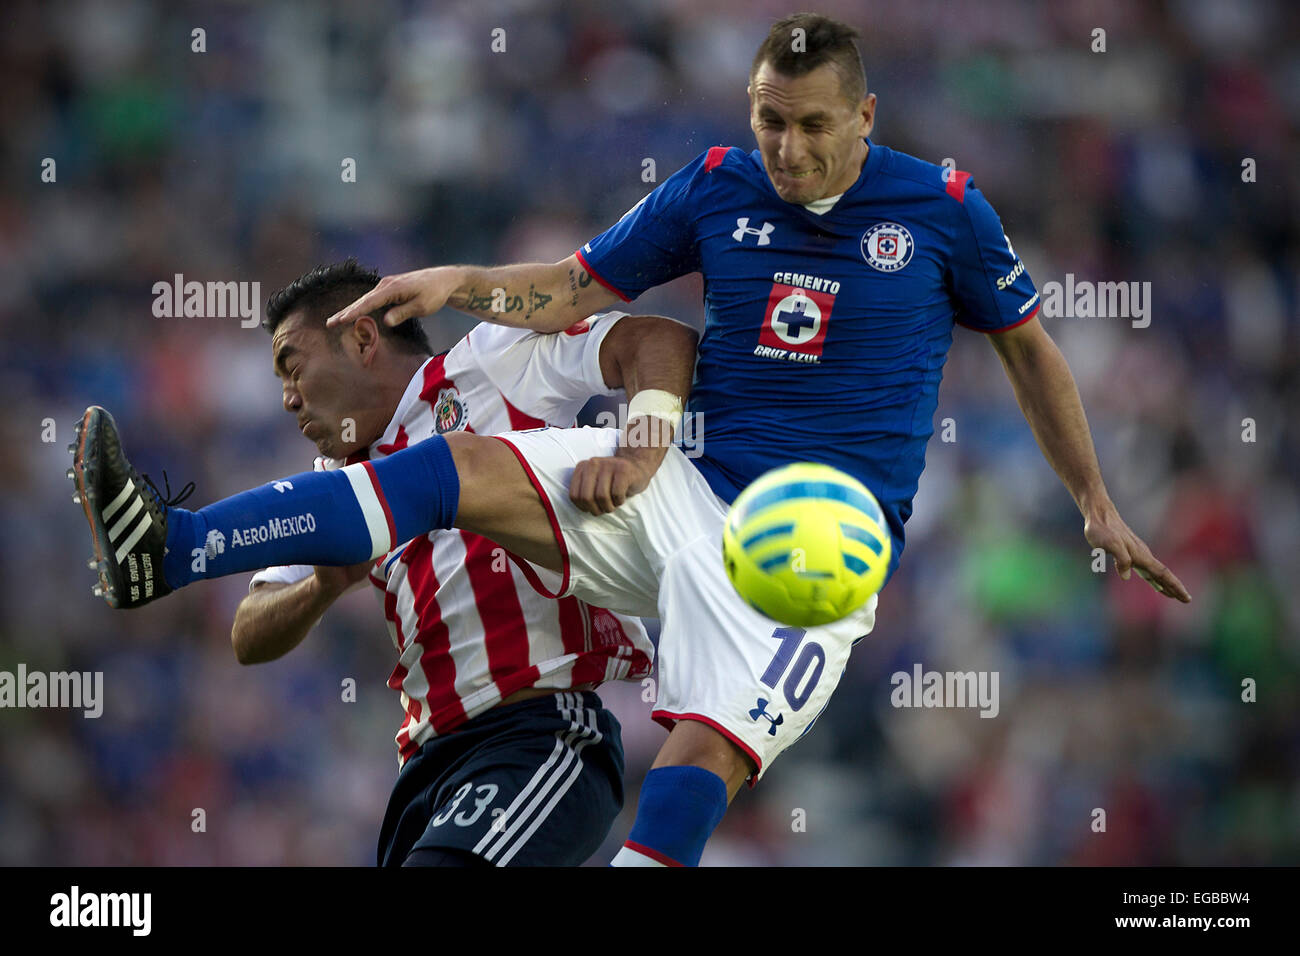 Mexico City, Mexico. 21st Feb, 2015. Cruz Azul's Christian Gimenez (R) vies for the ball with Marco Fabian of Chivas during the match of the 2015 Closing Tournament on MX League in the Azul Stadium in Mexico City, capital of Mexico, on Feb. 21, 2015. © Alejandro Ayala/Xinhua/Alamy Live News Stock Photo